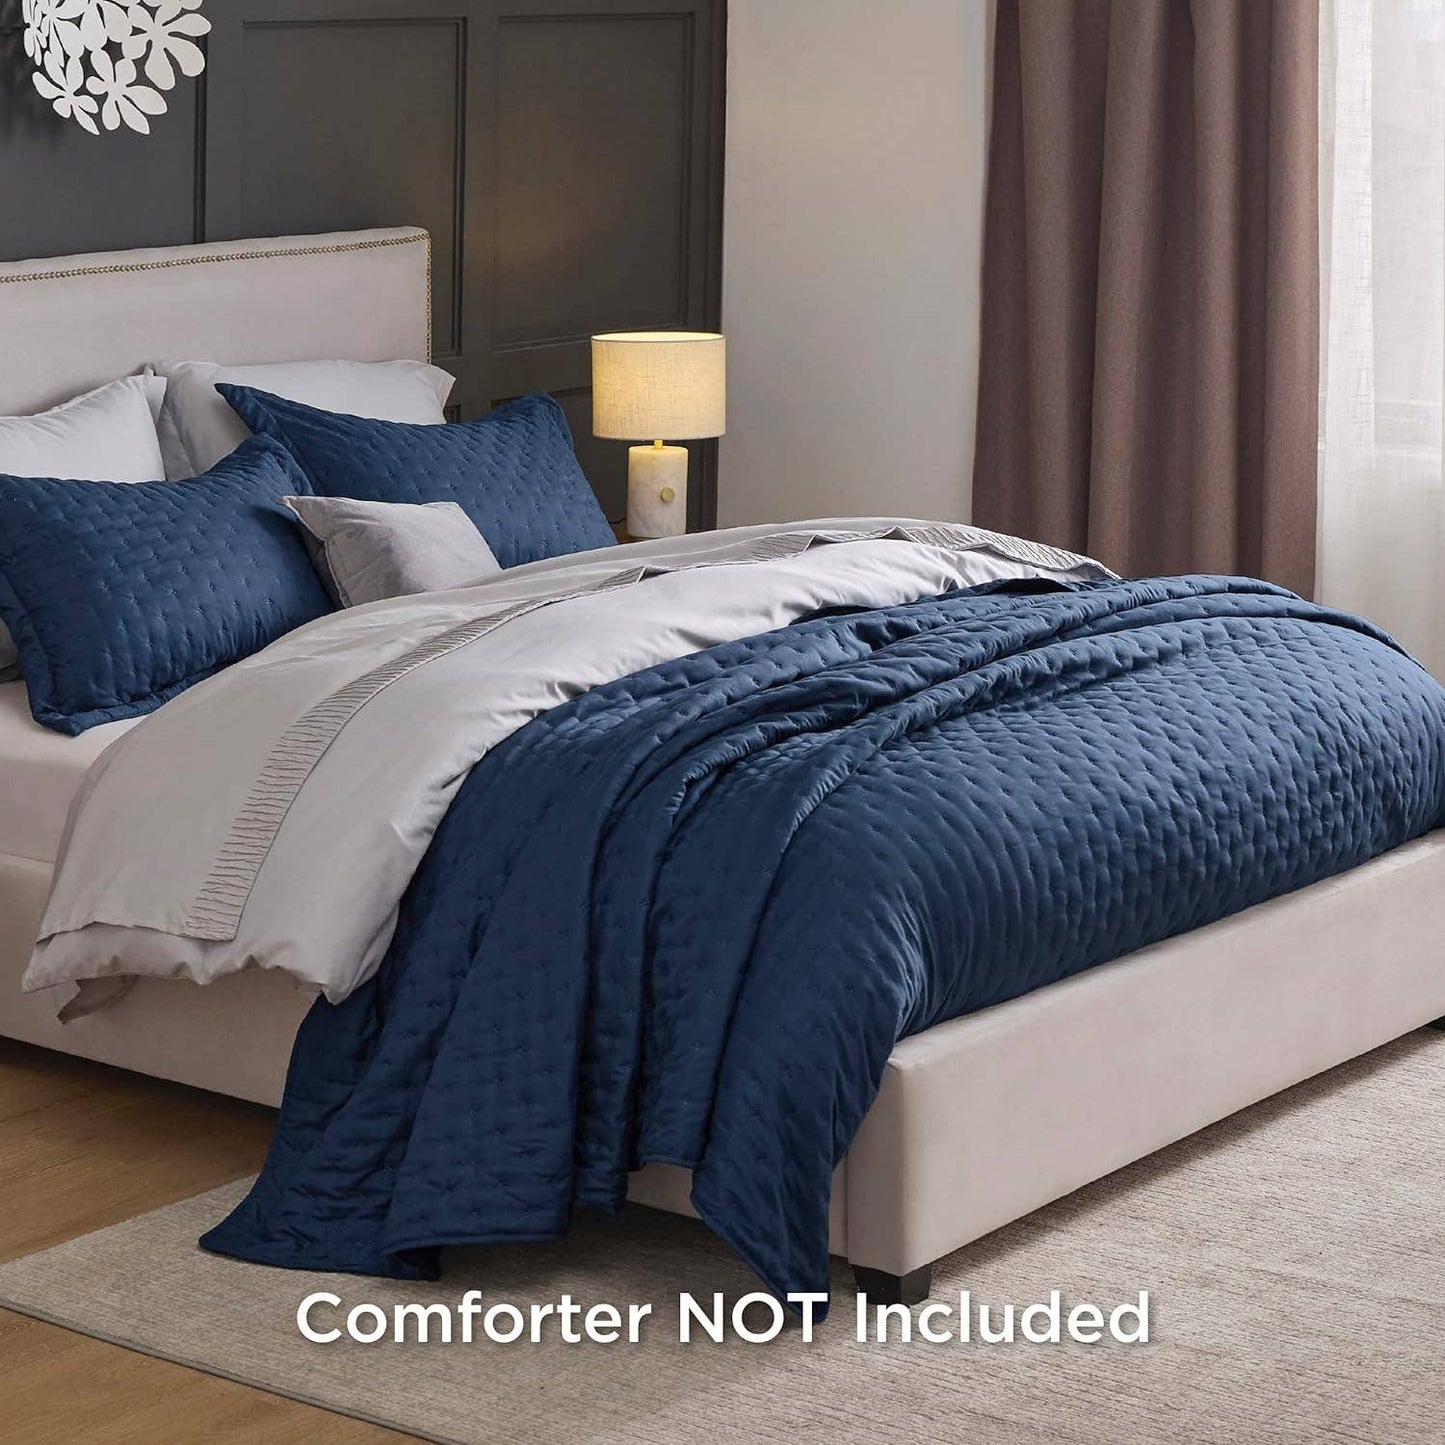 New Navy Bedsure Queen Quilted Comforter and 2 shams for all seasons